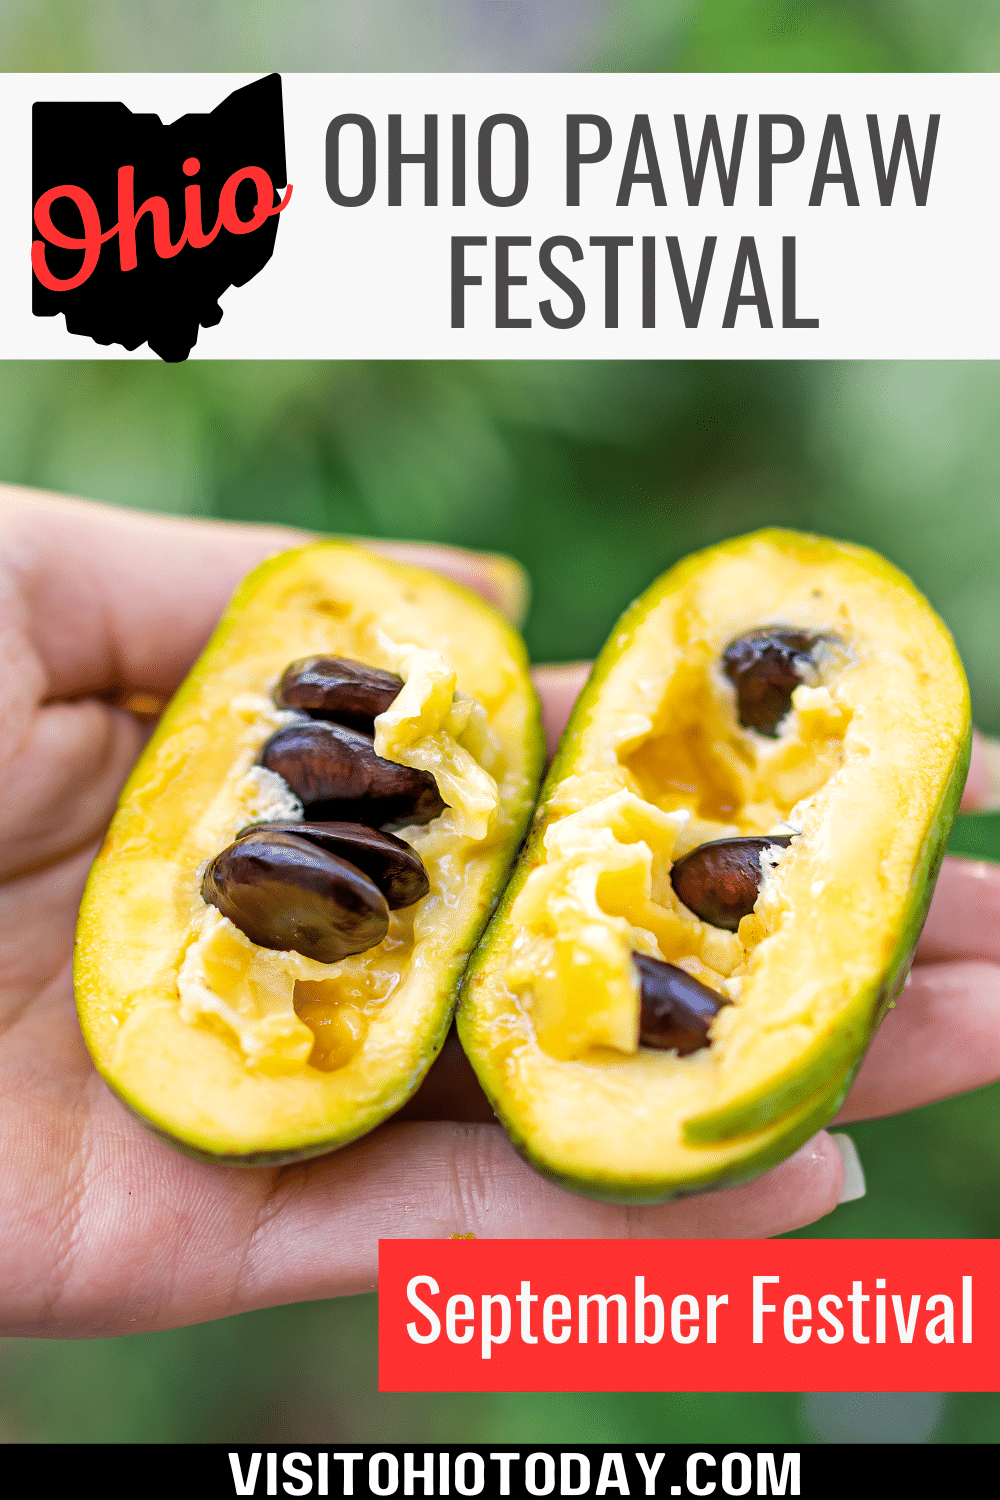 The Ohio Pawpaw Festival celebrates this large native tree fruit with lots of pawpaw food and drink on offer. Held on the weekend of September 15 to 17 2023.